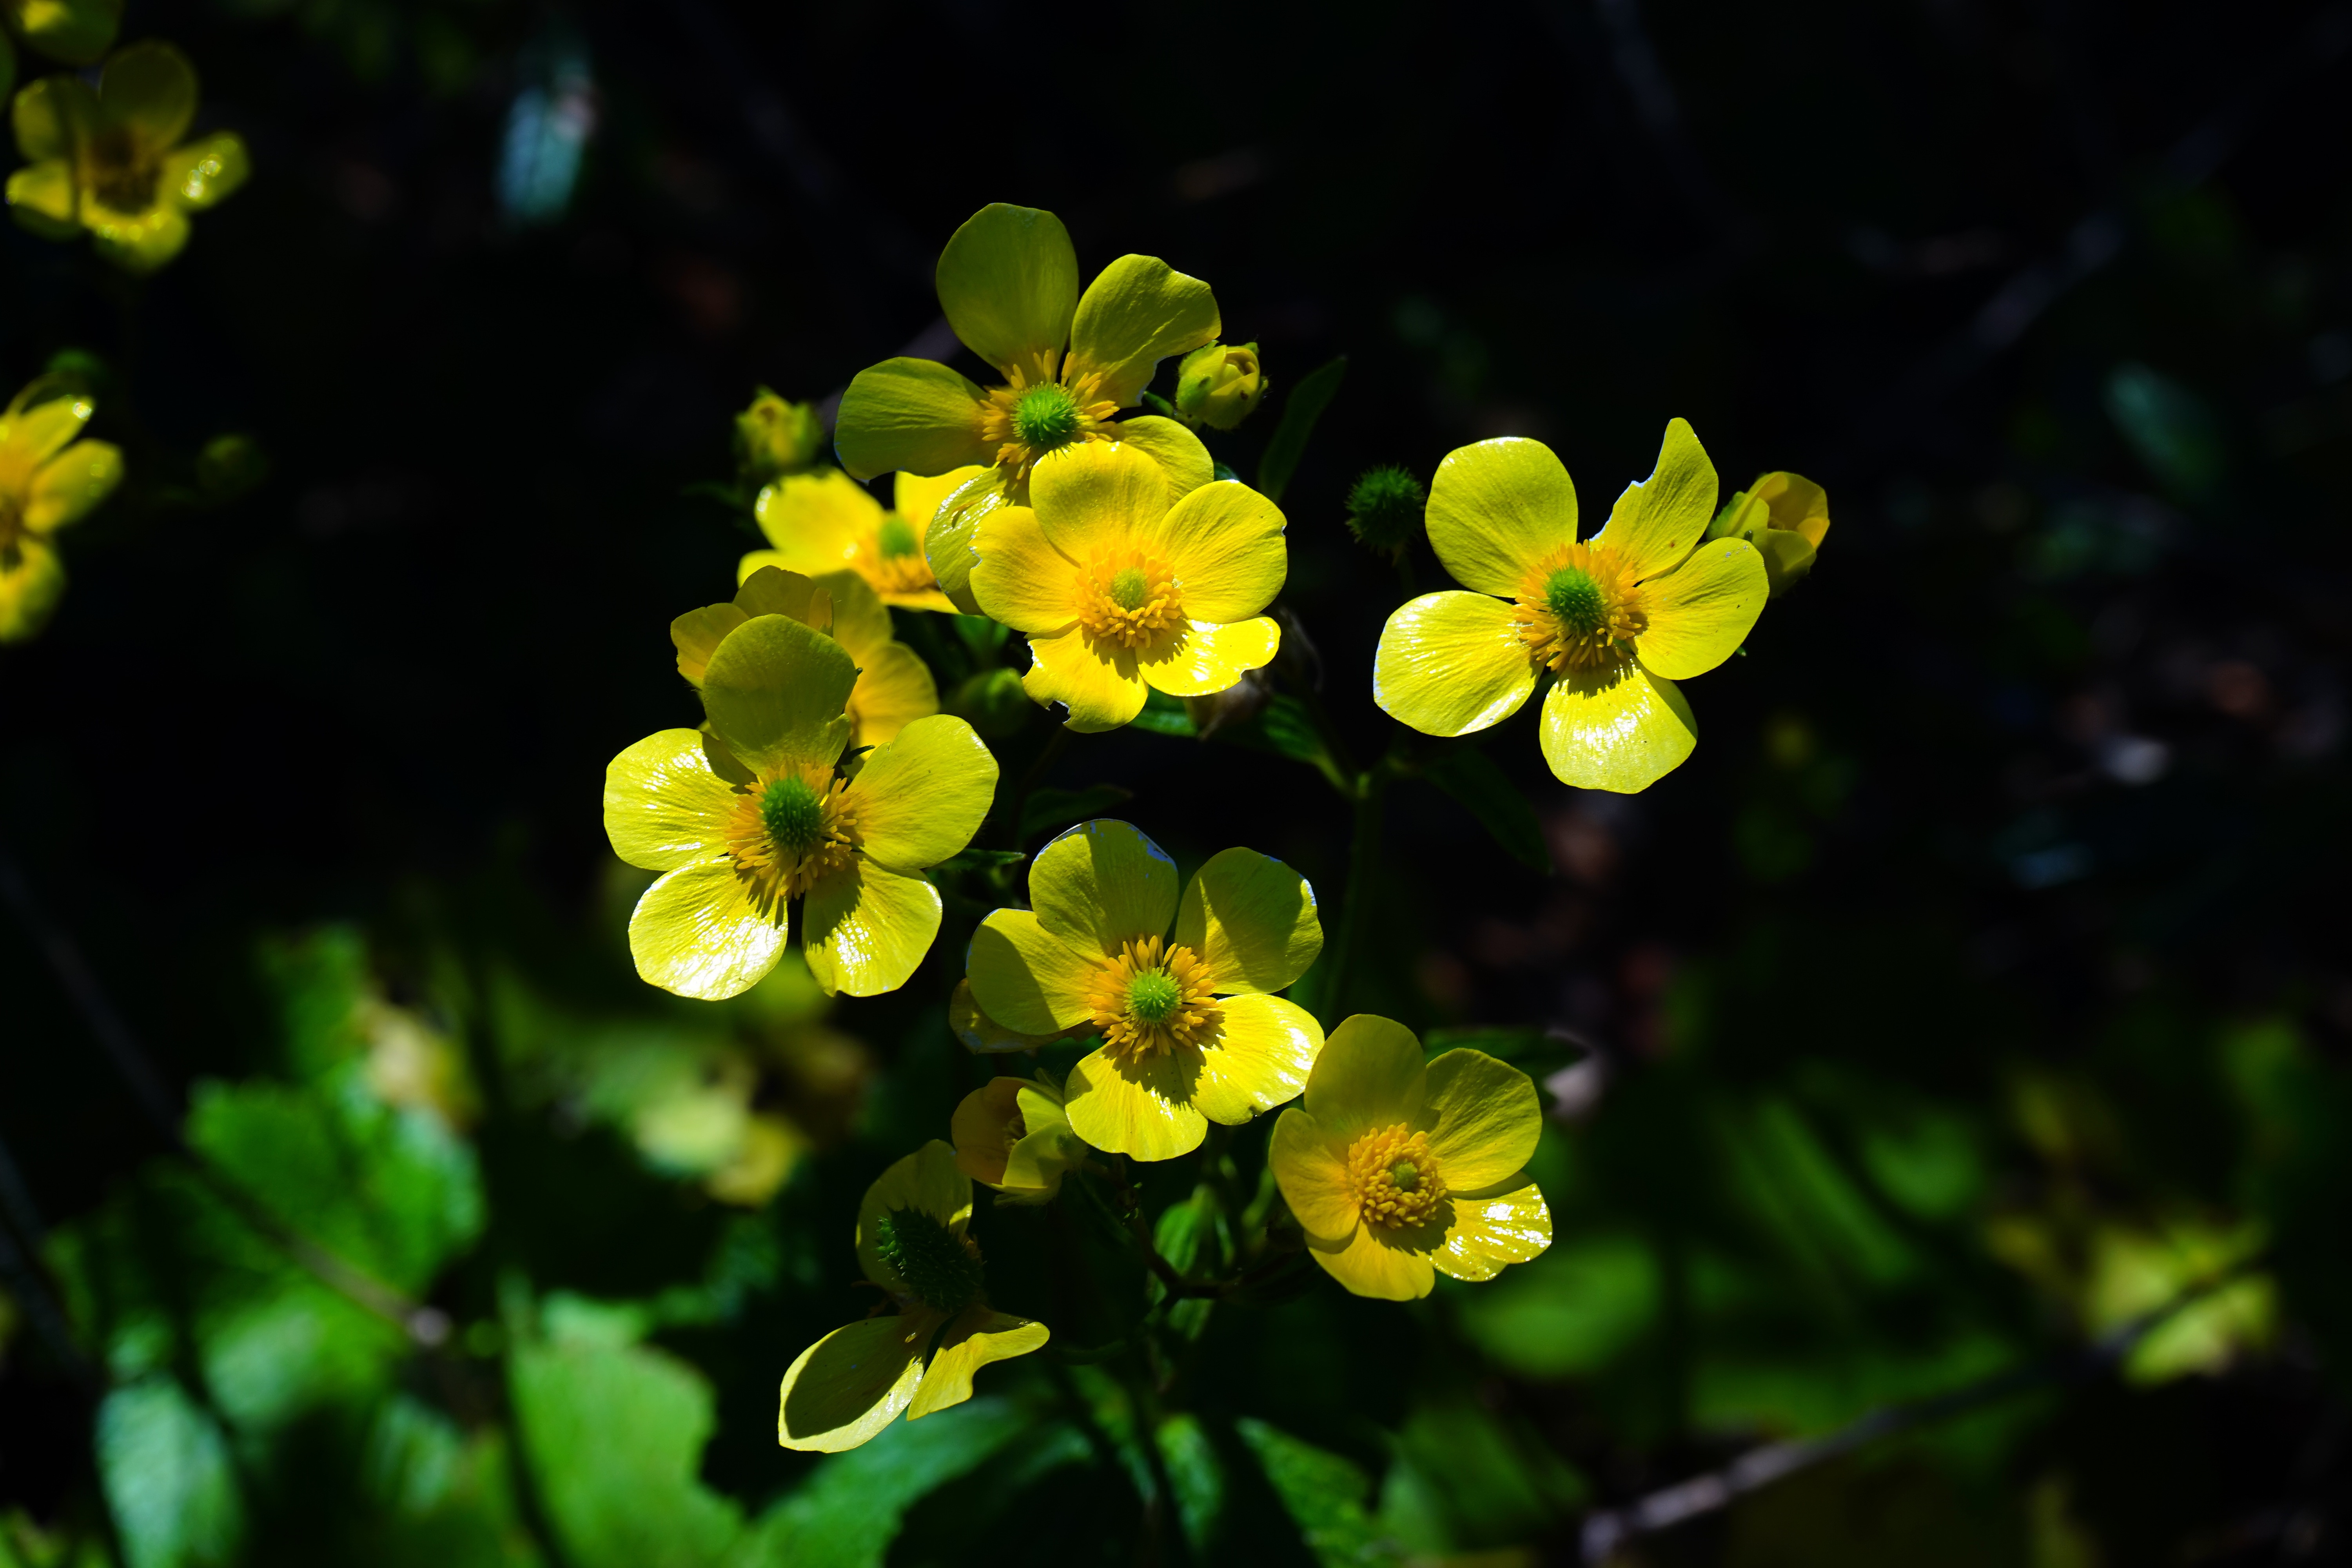 yellow petaled flower near green leaf tree during daytime